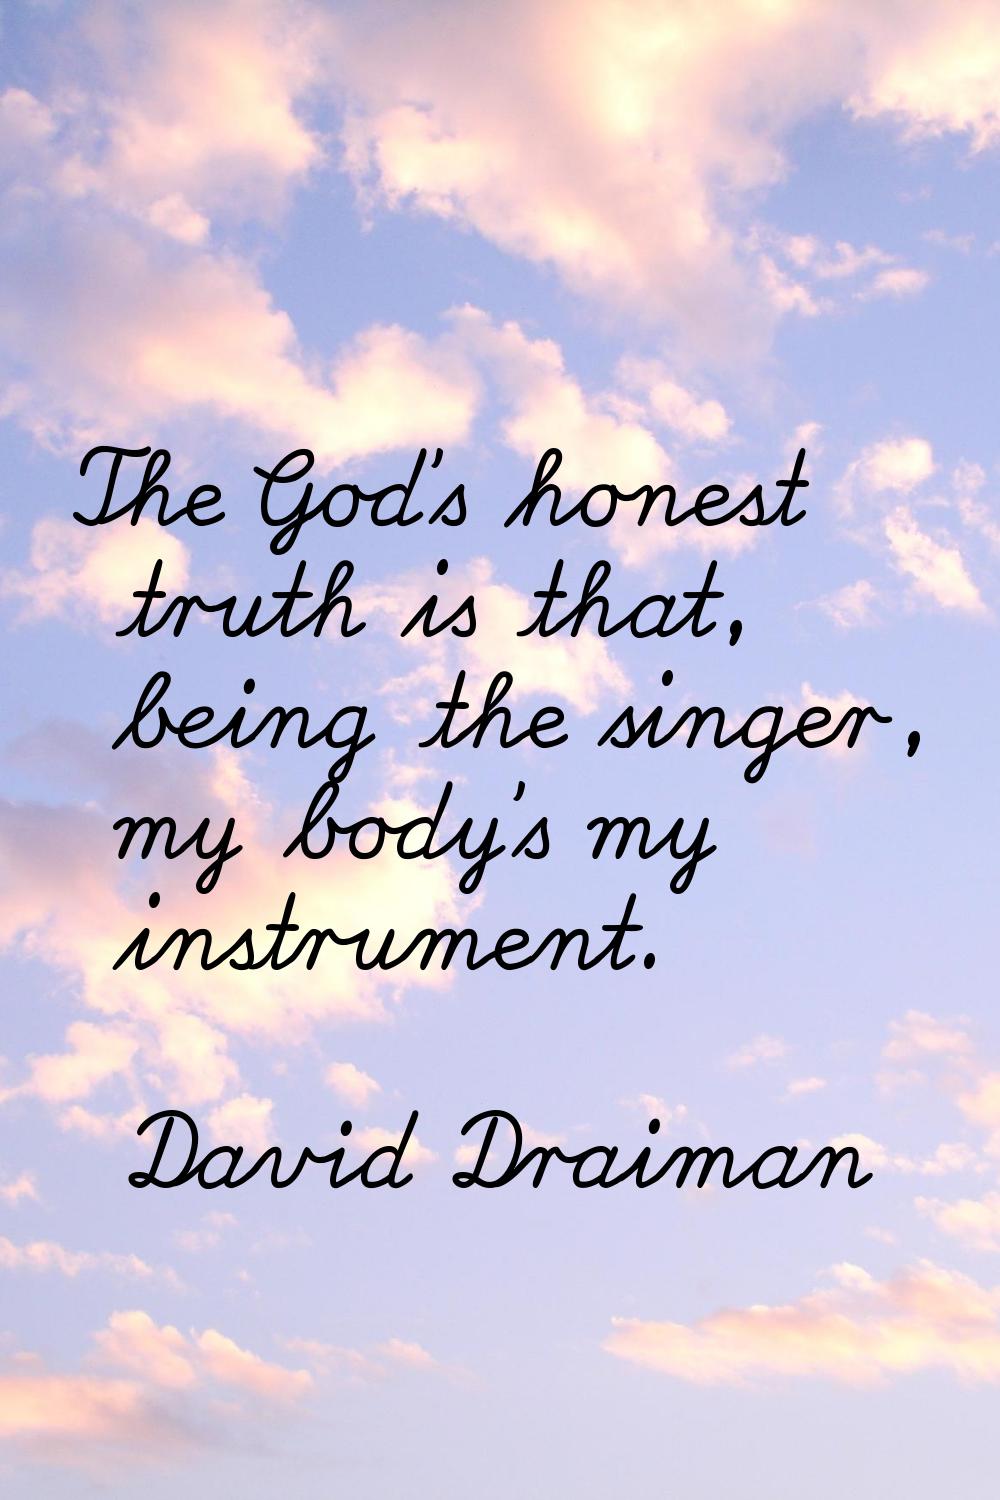 The God's honest truth is that, being the singer, my body's my instrument.